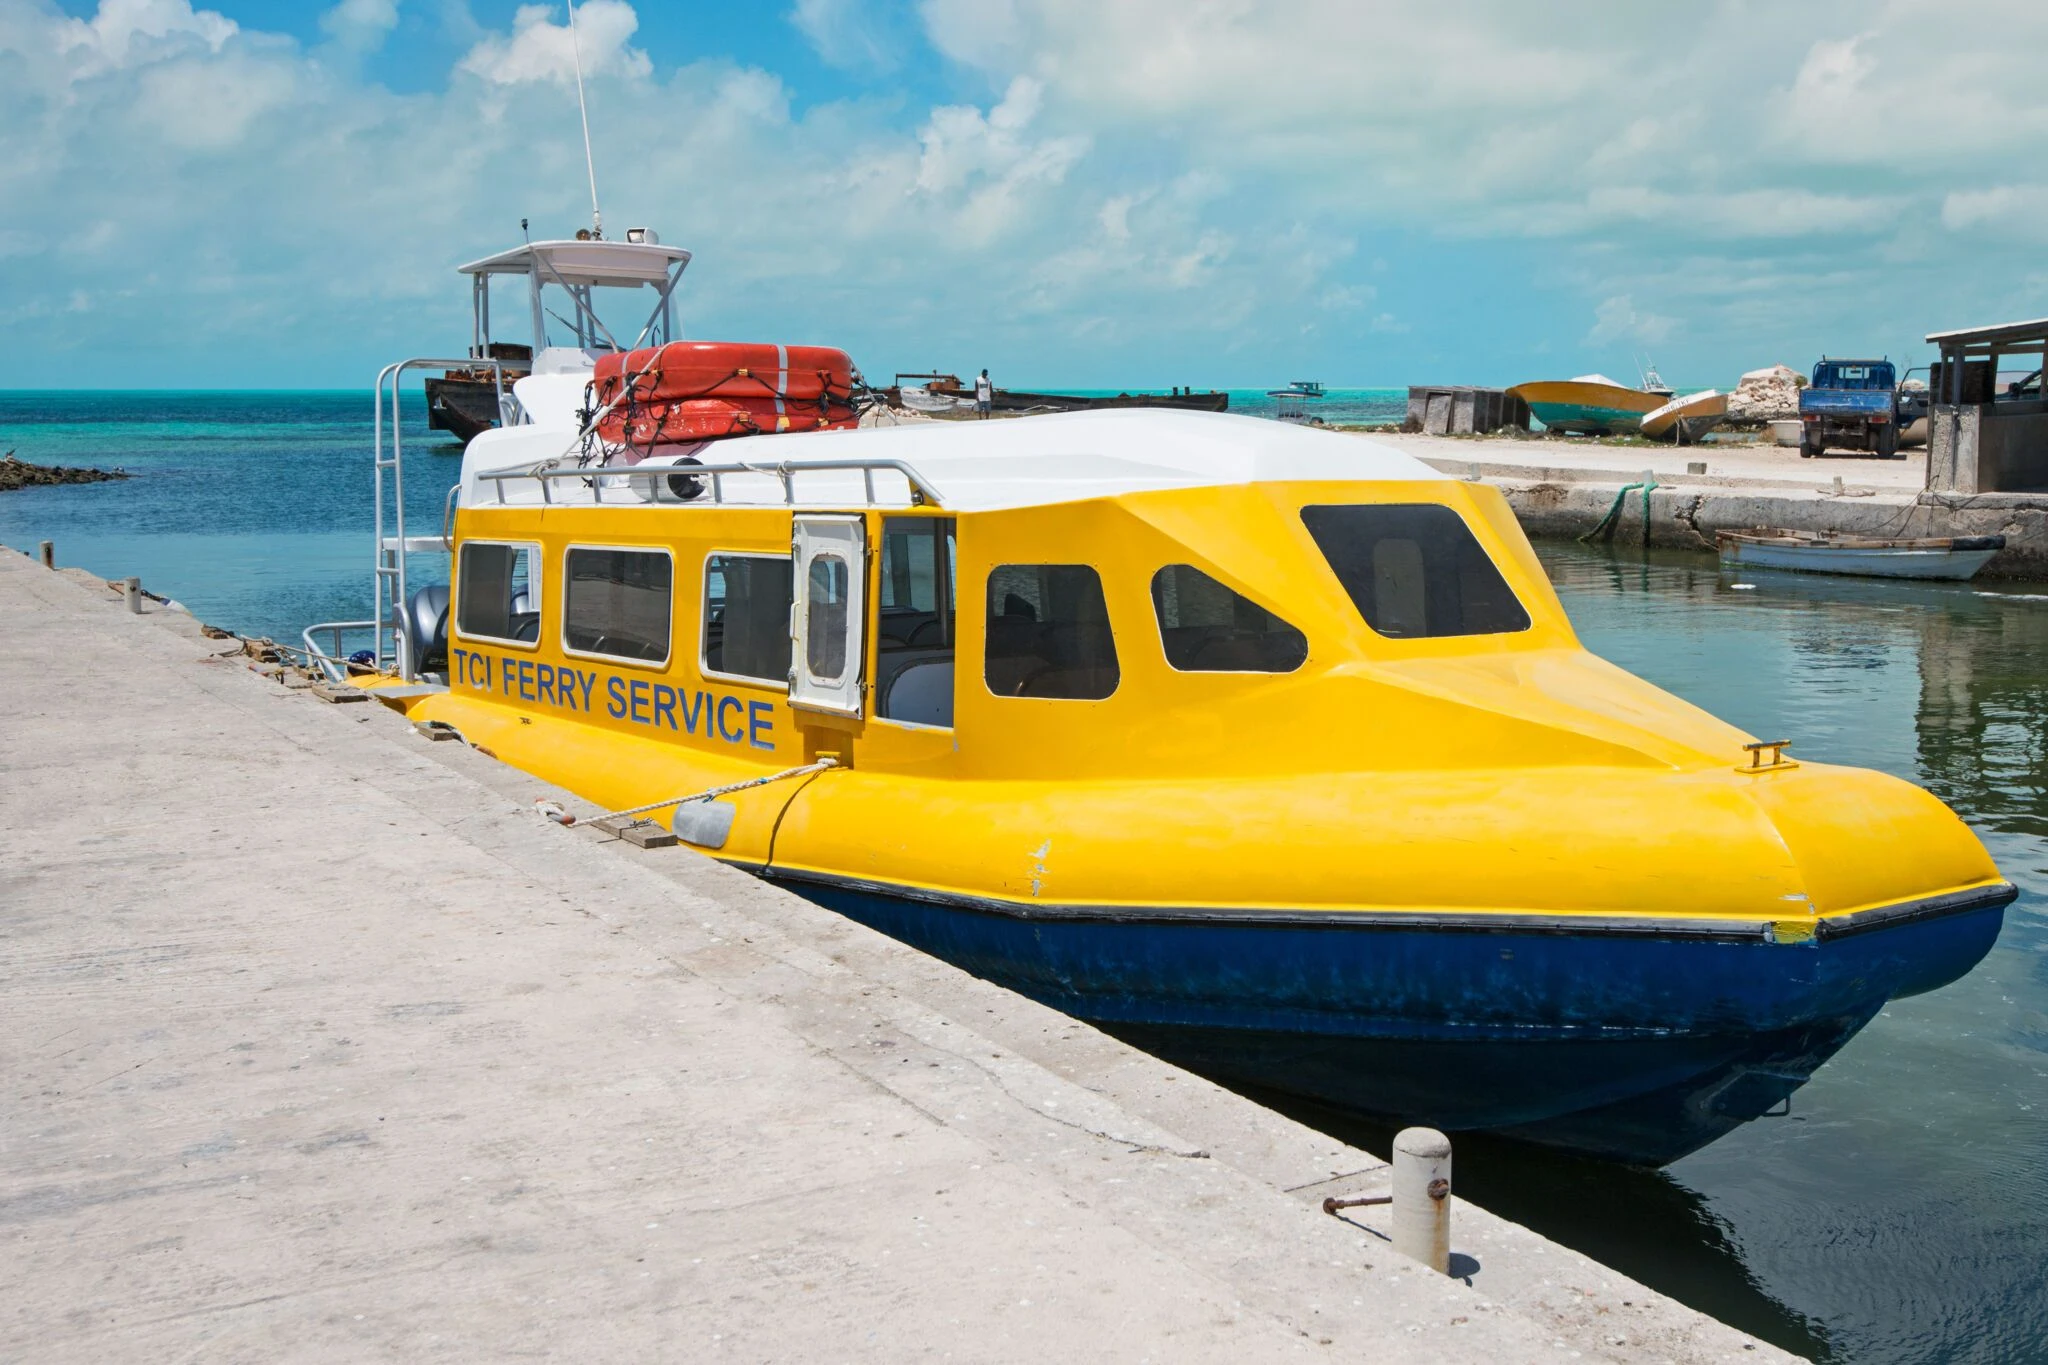 Ferry services between islands on Turks & Caicos © www.visittci.com